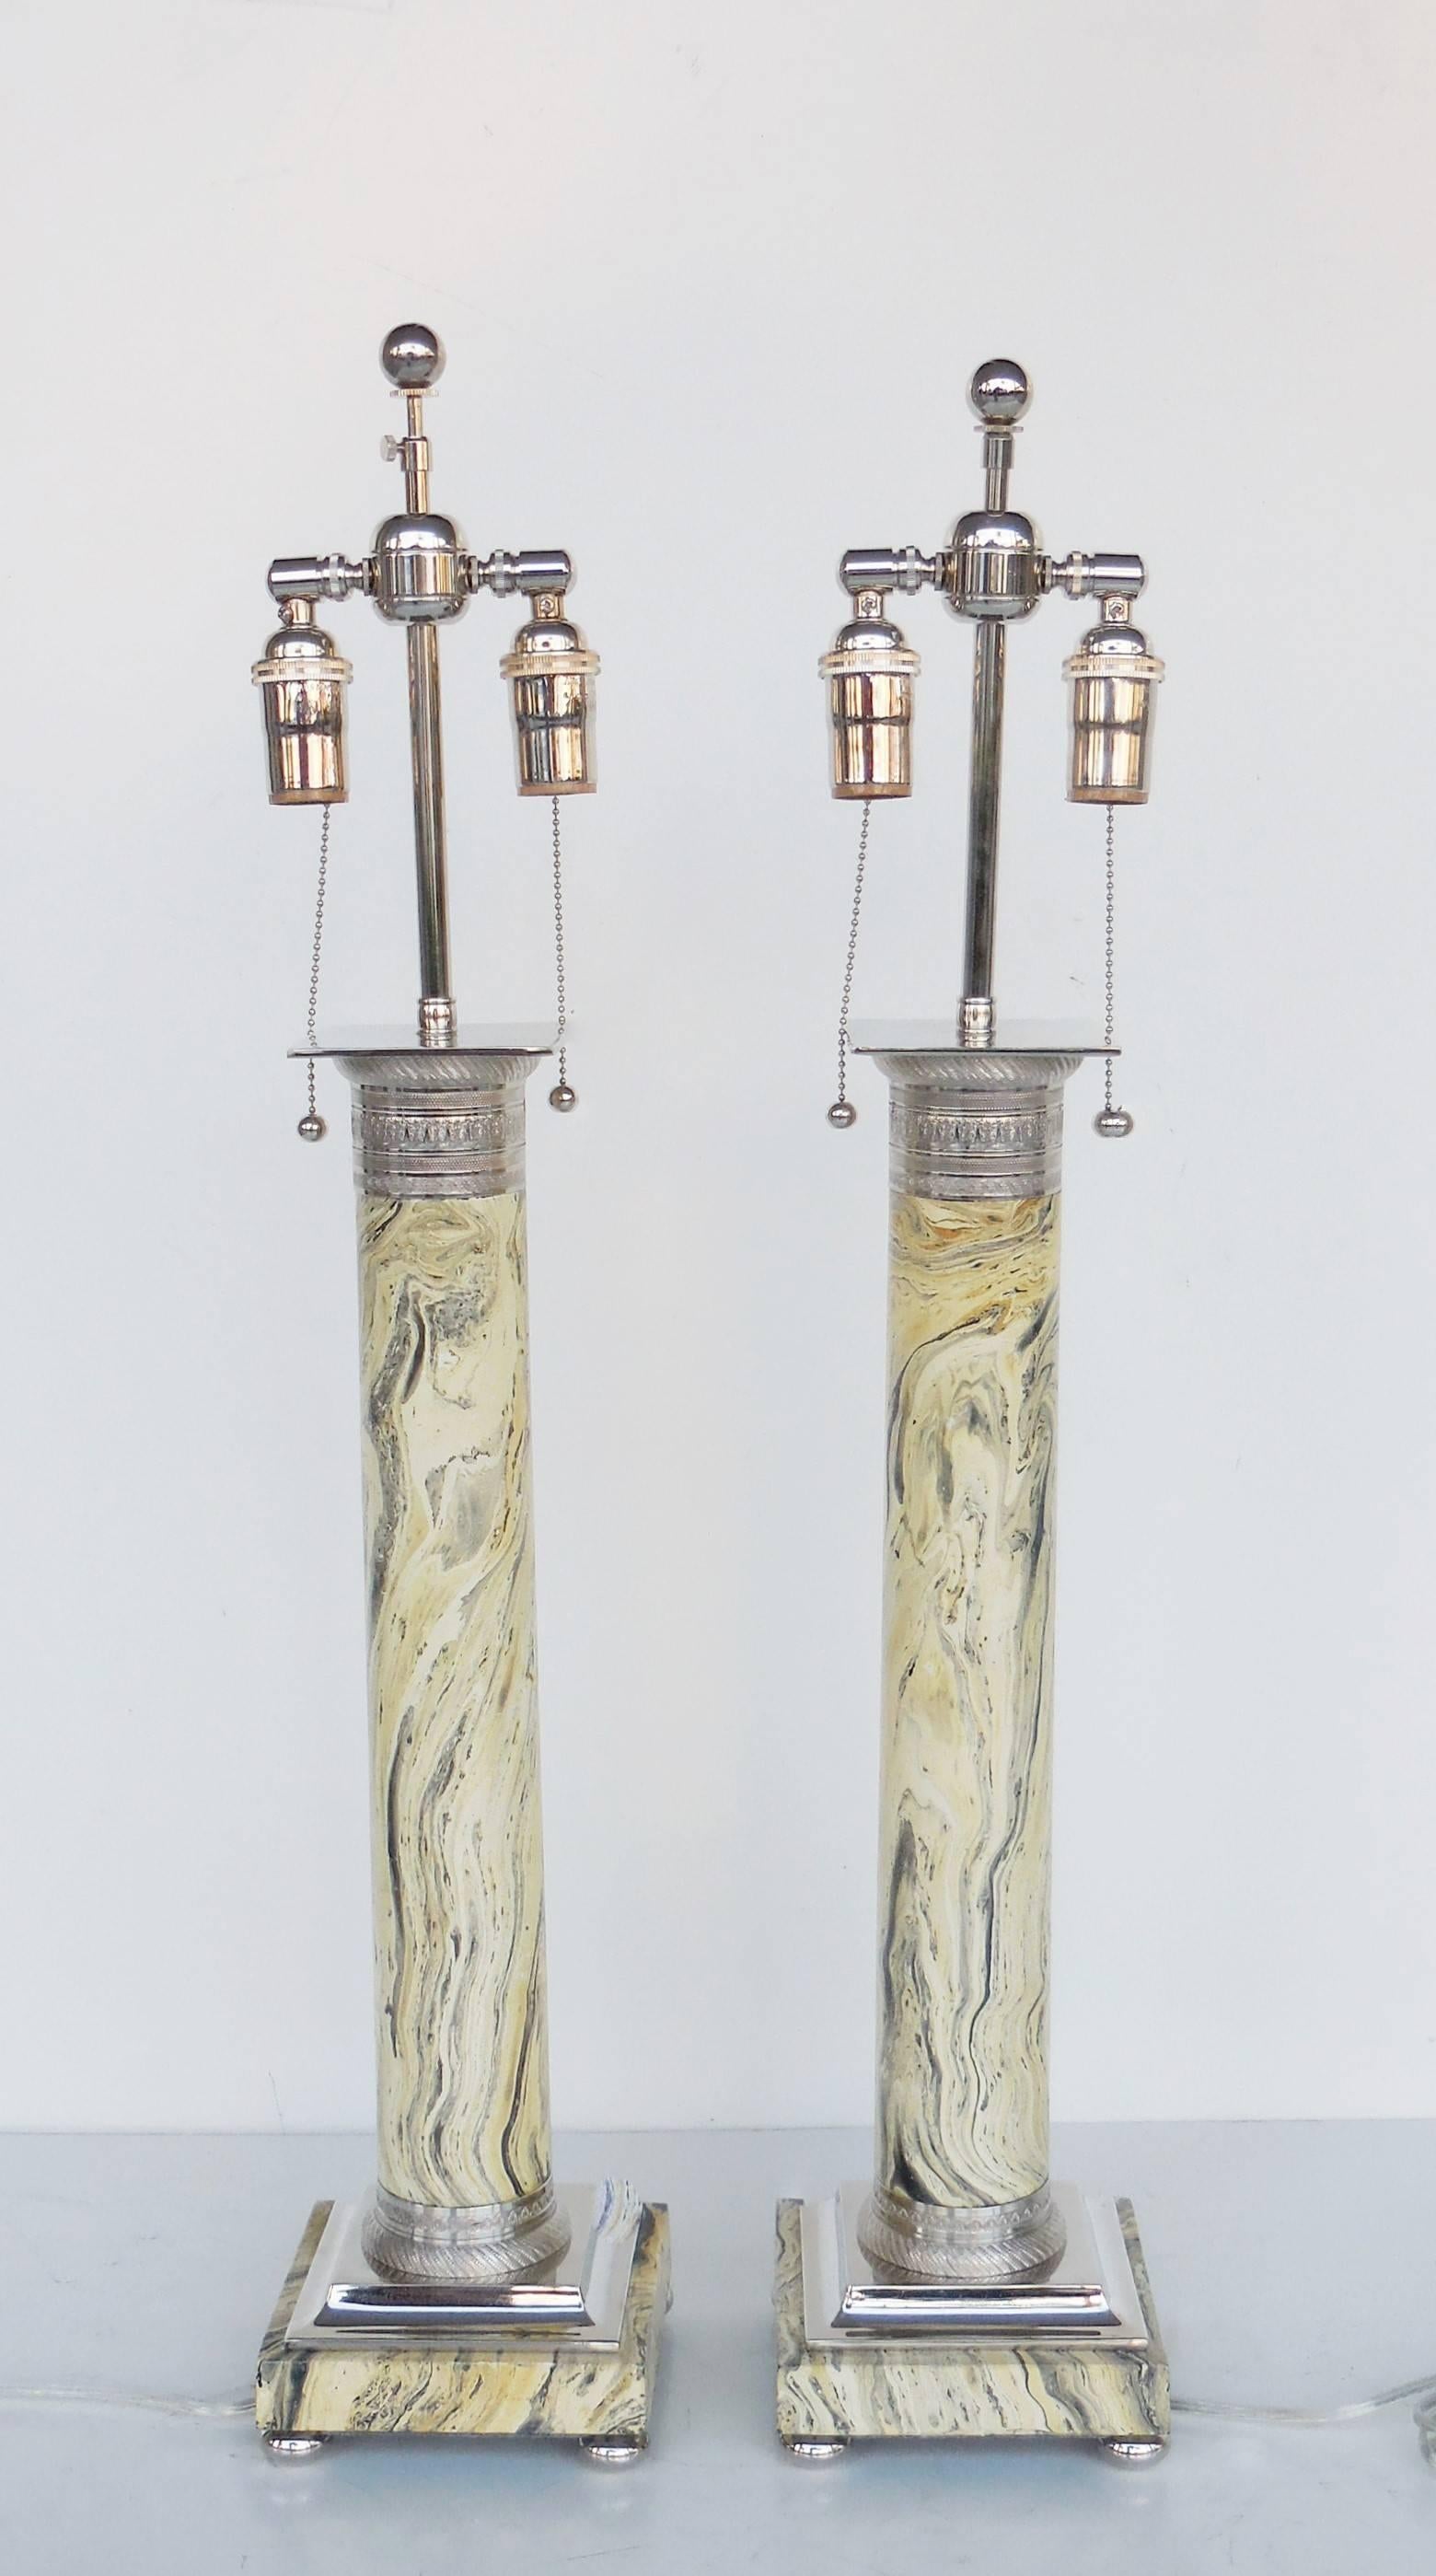 Great pair of Mid-Century lamps. Tall columns with very detailed faux marble decoration, the top and bottom of the columns are nickel plated bronze as well as the bun feet. Note the fine crisp detail on the capital and base. Completely restored and